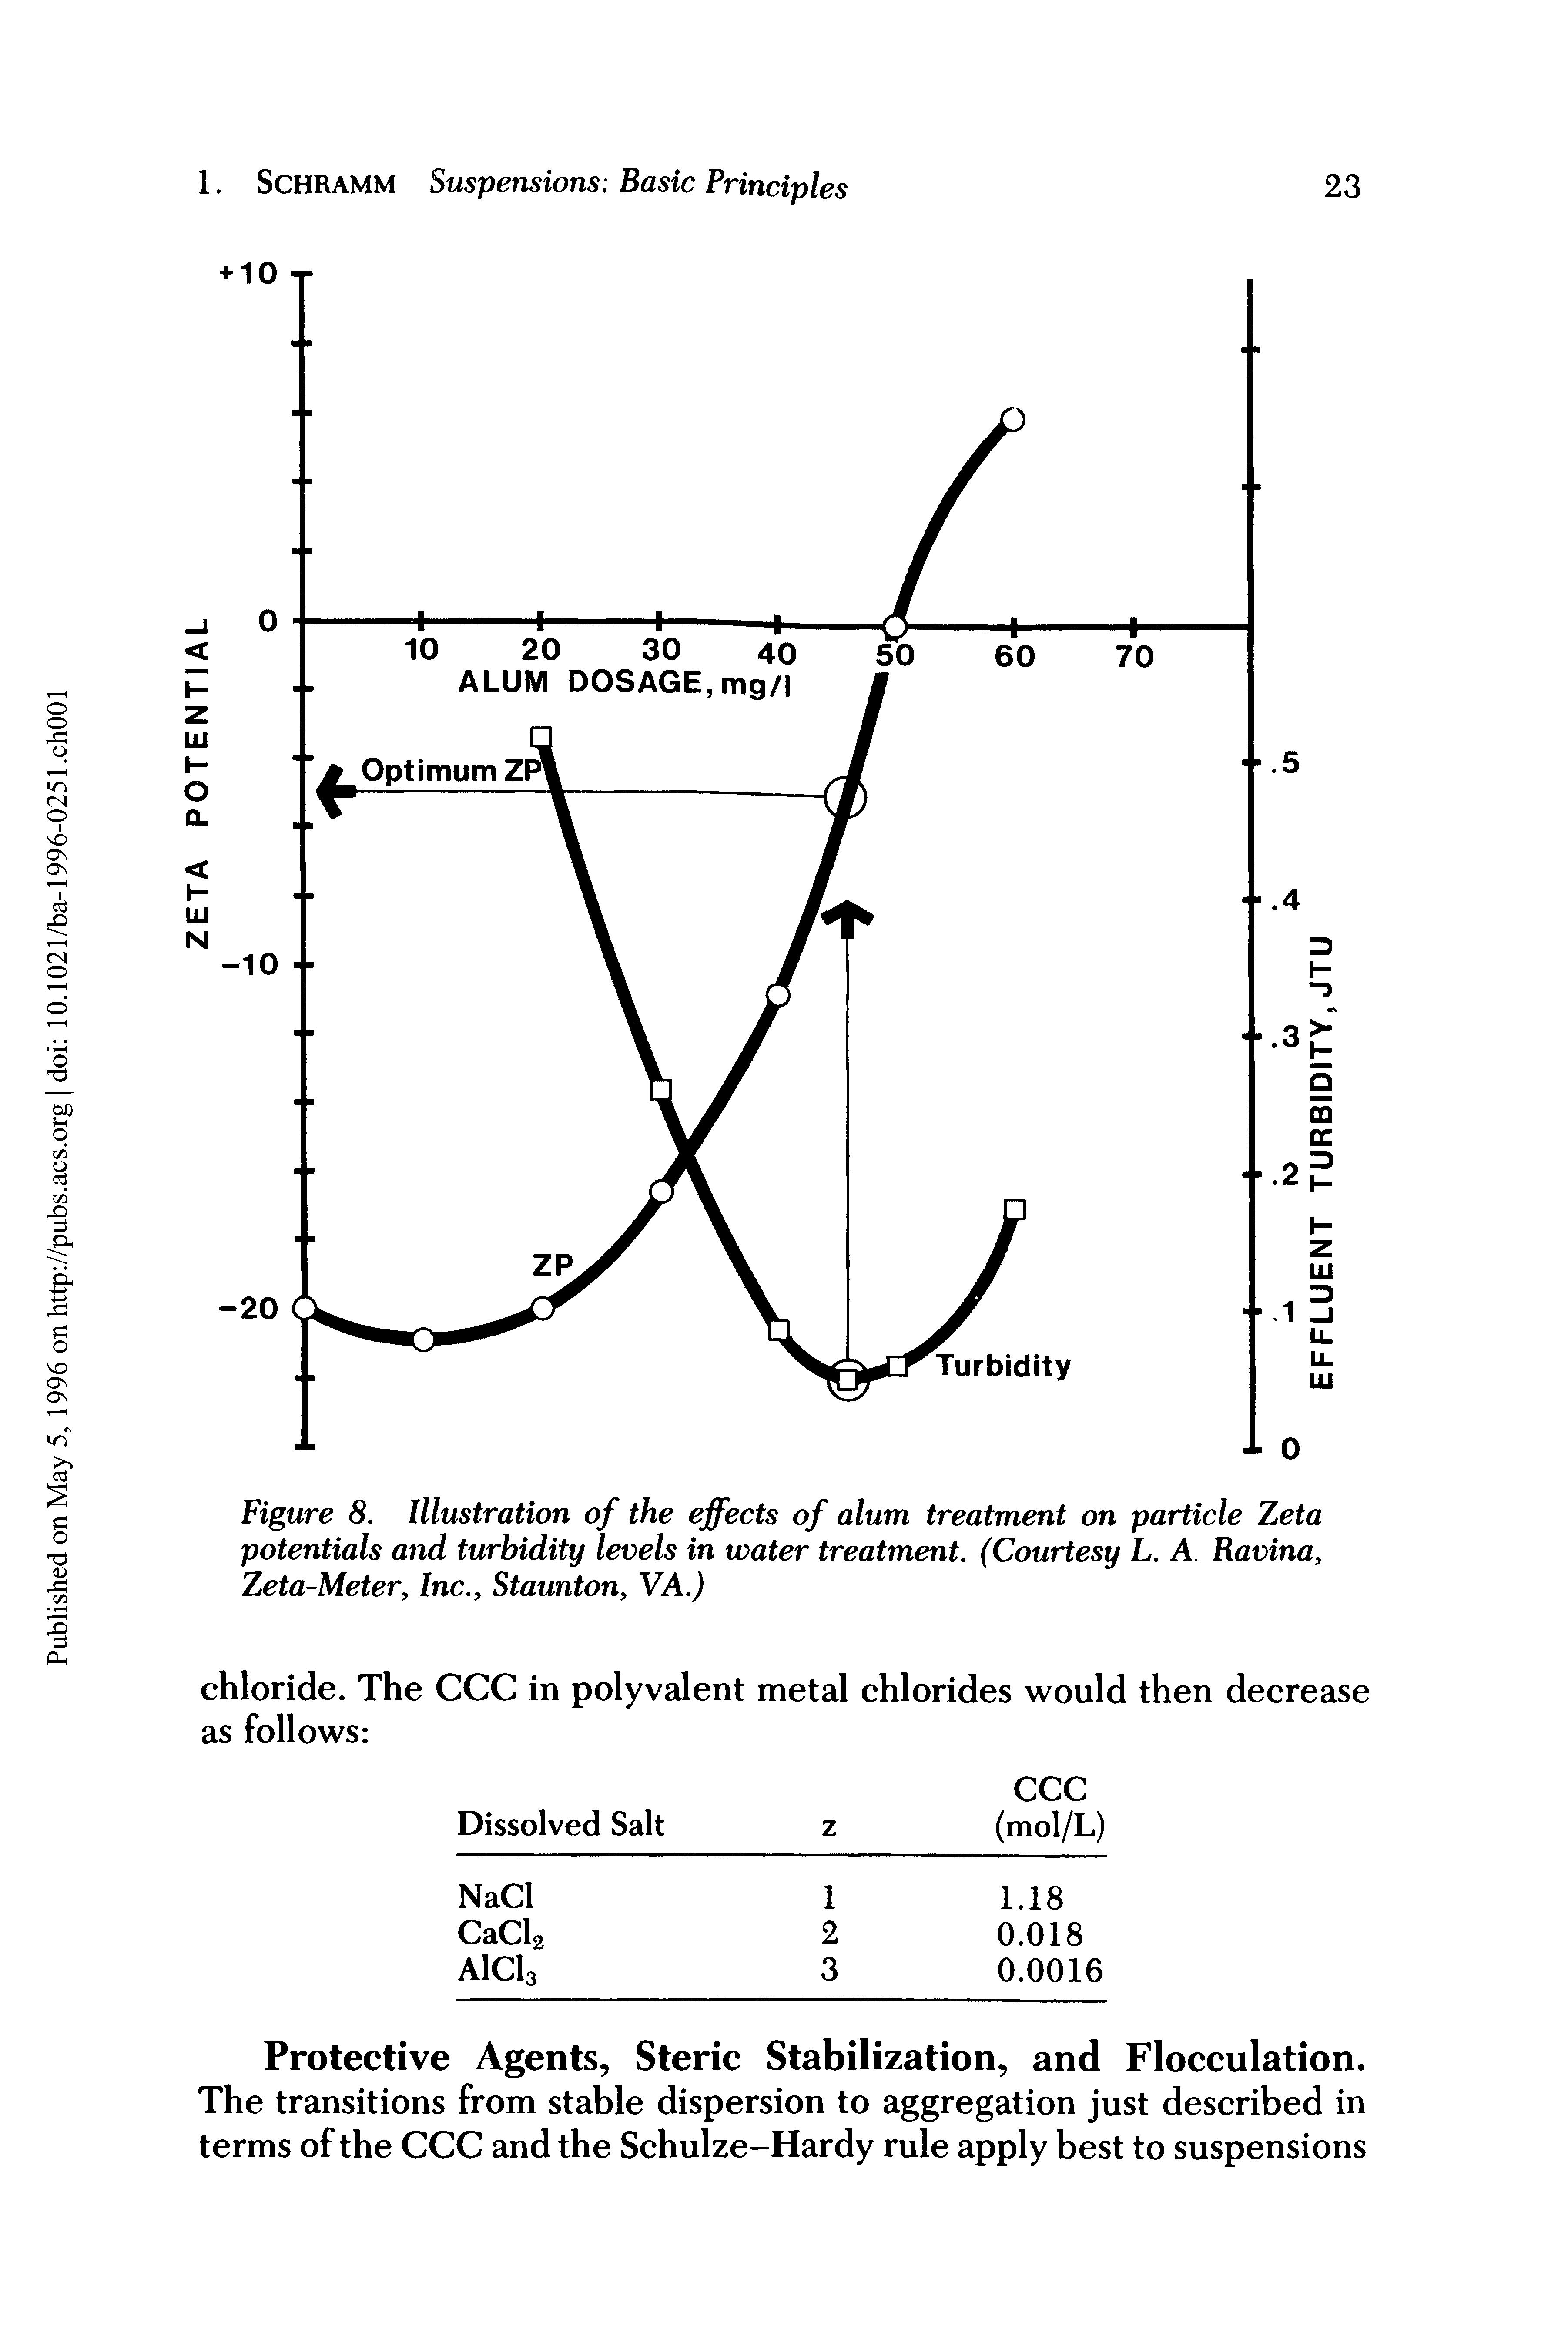 Figure 8. Illustration of the effects of alum treatment on particle Zeta potentials and turbidity levels in water treatment. (Courtesy L. A. Ravina, Zeta-Meter, Inc., Staunton, VA.)...